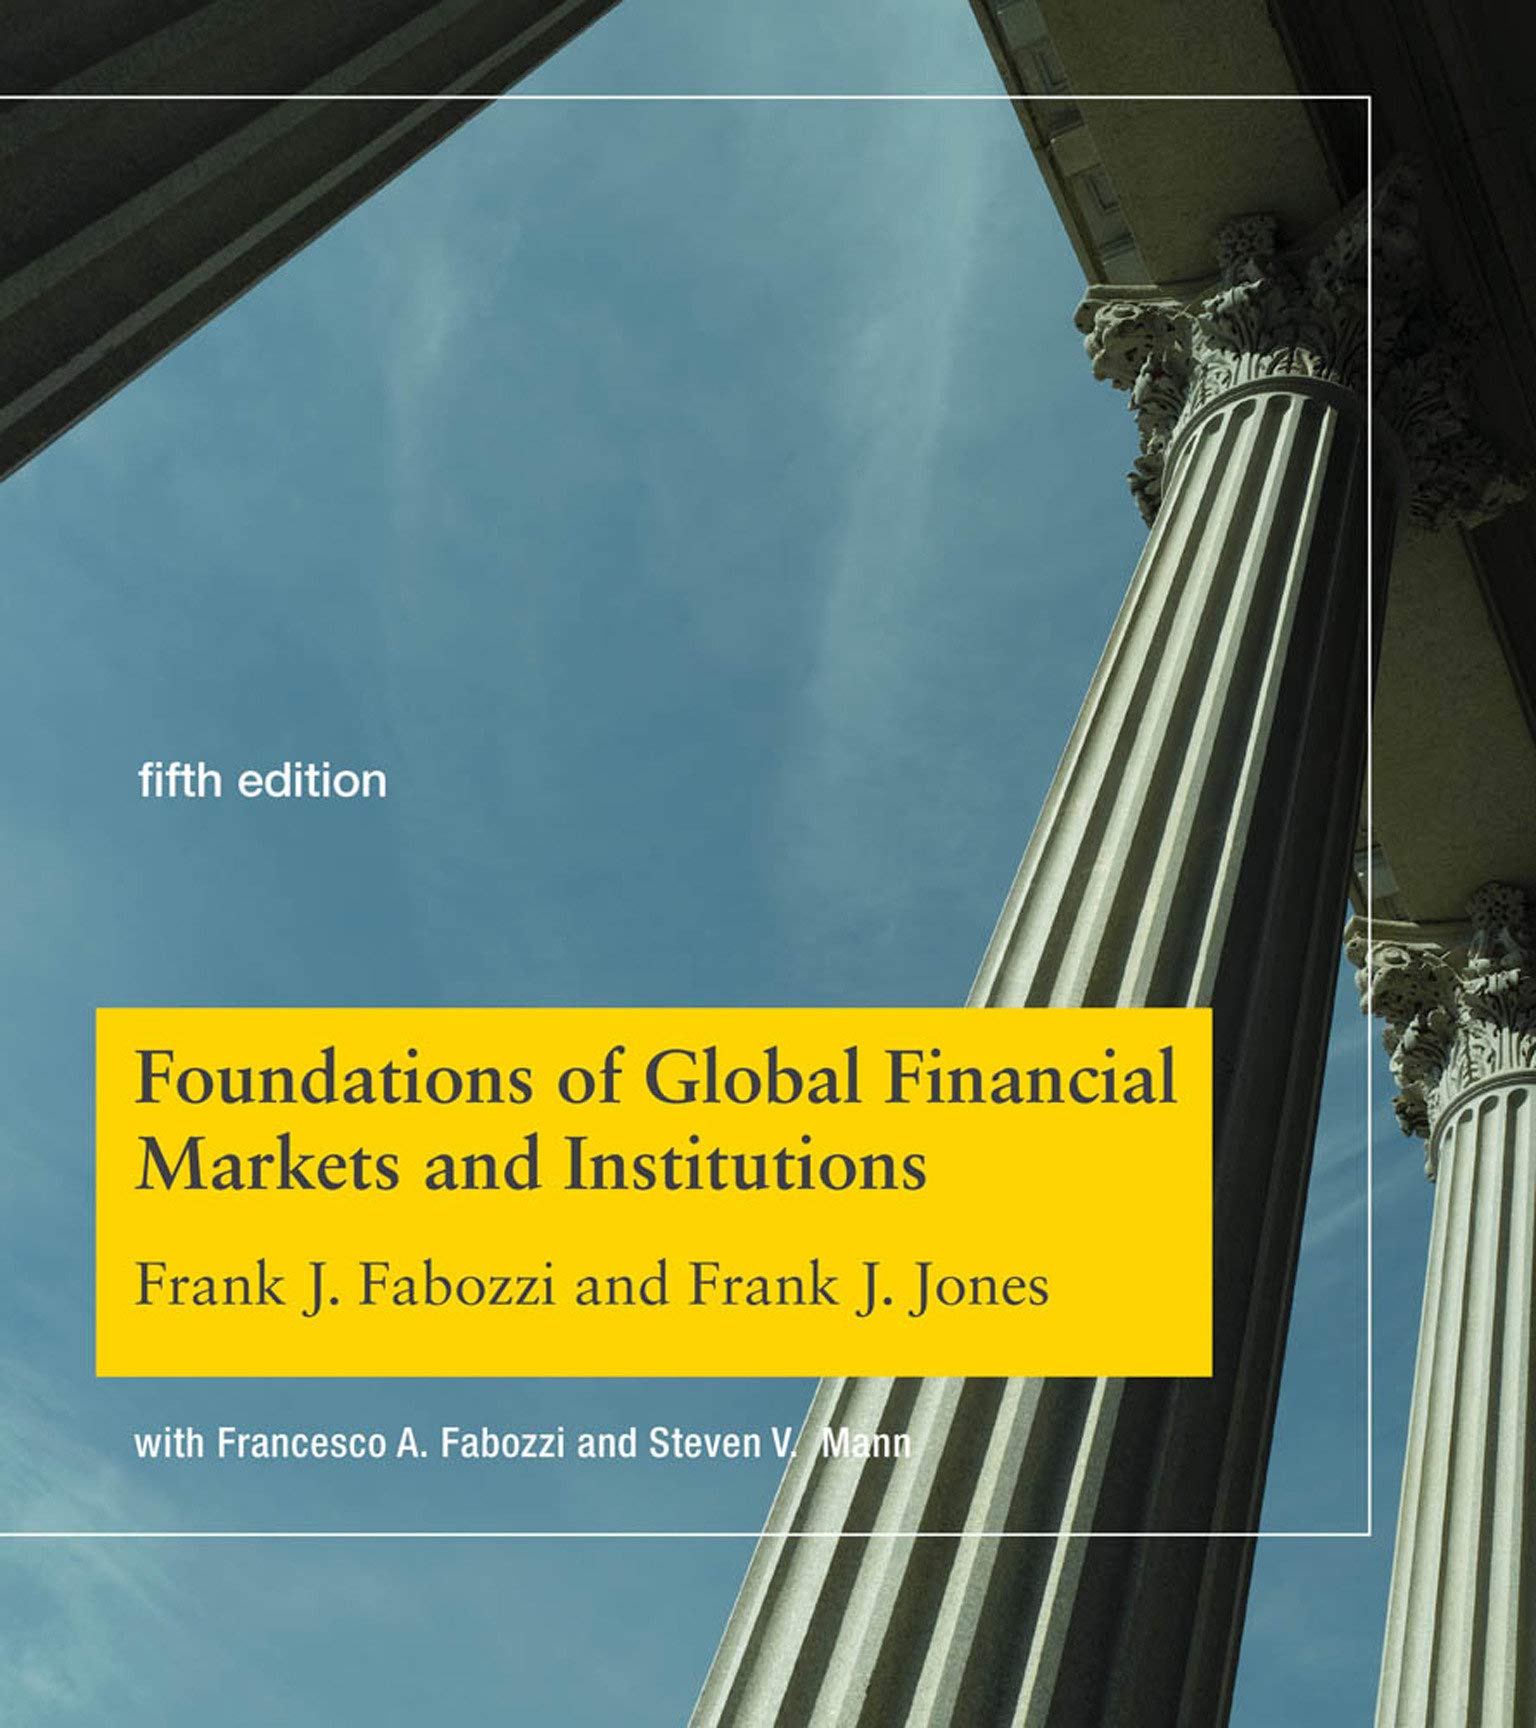 Foundations of Global Financial Markets and Institutions, fifth edition (The MIT Press)